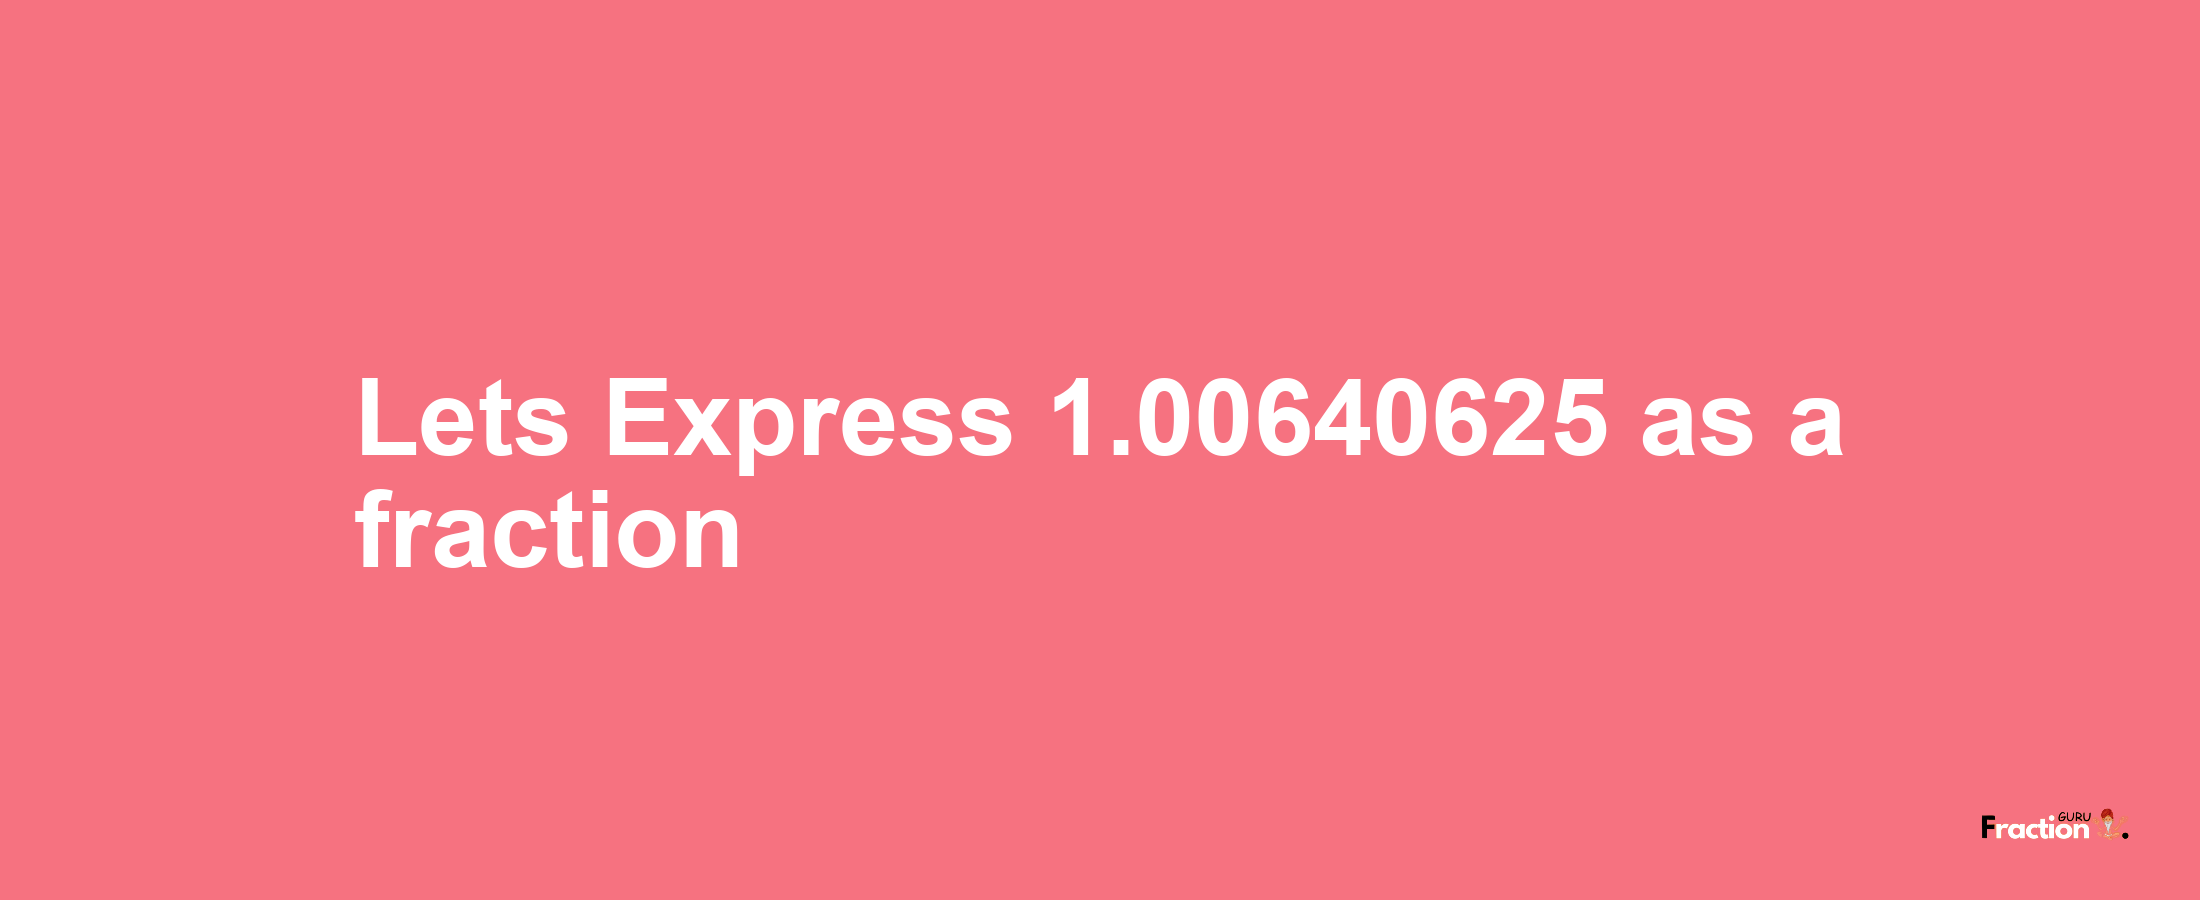 Lets Express 1.00640625 as afraction